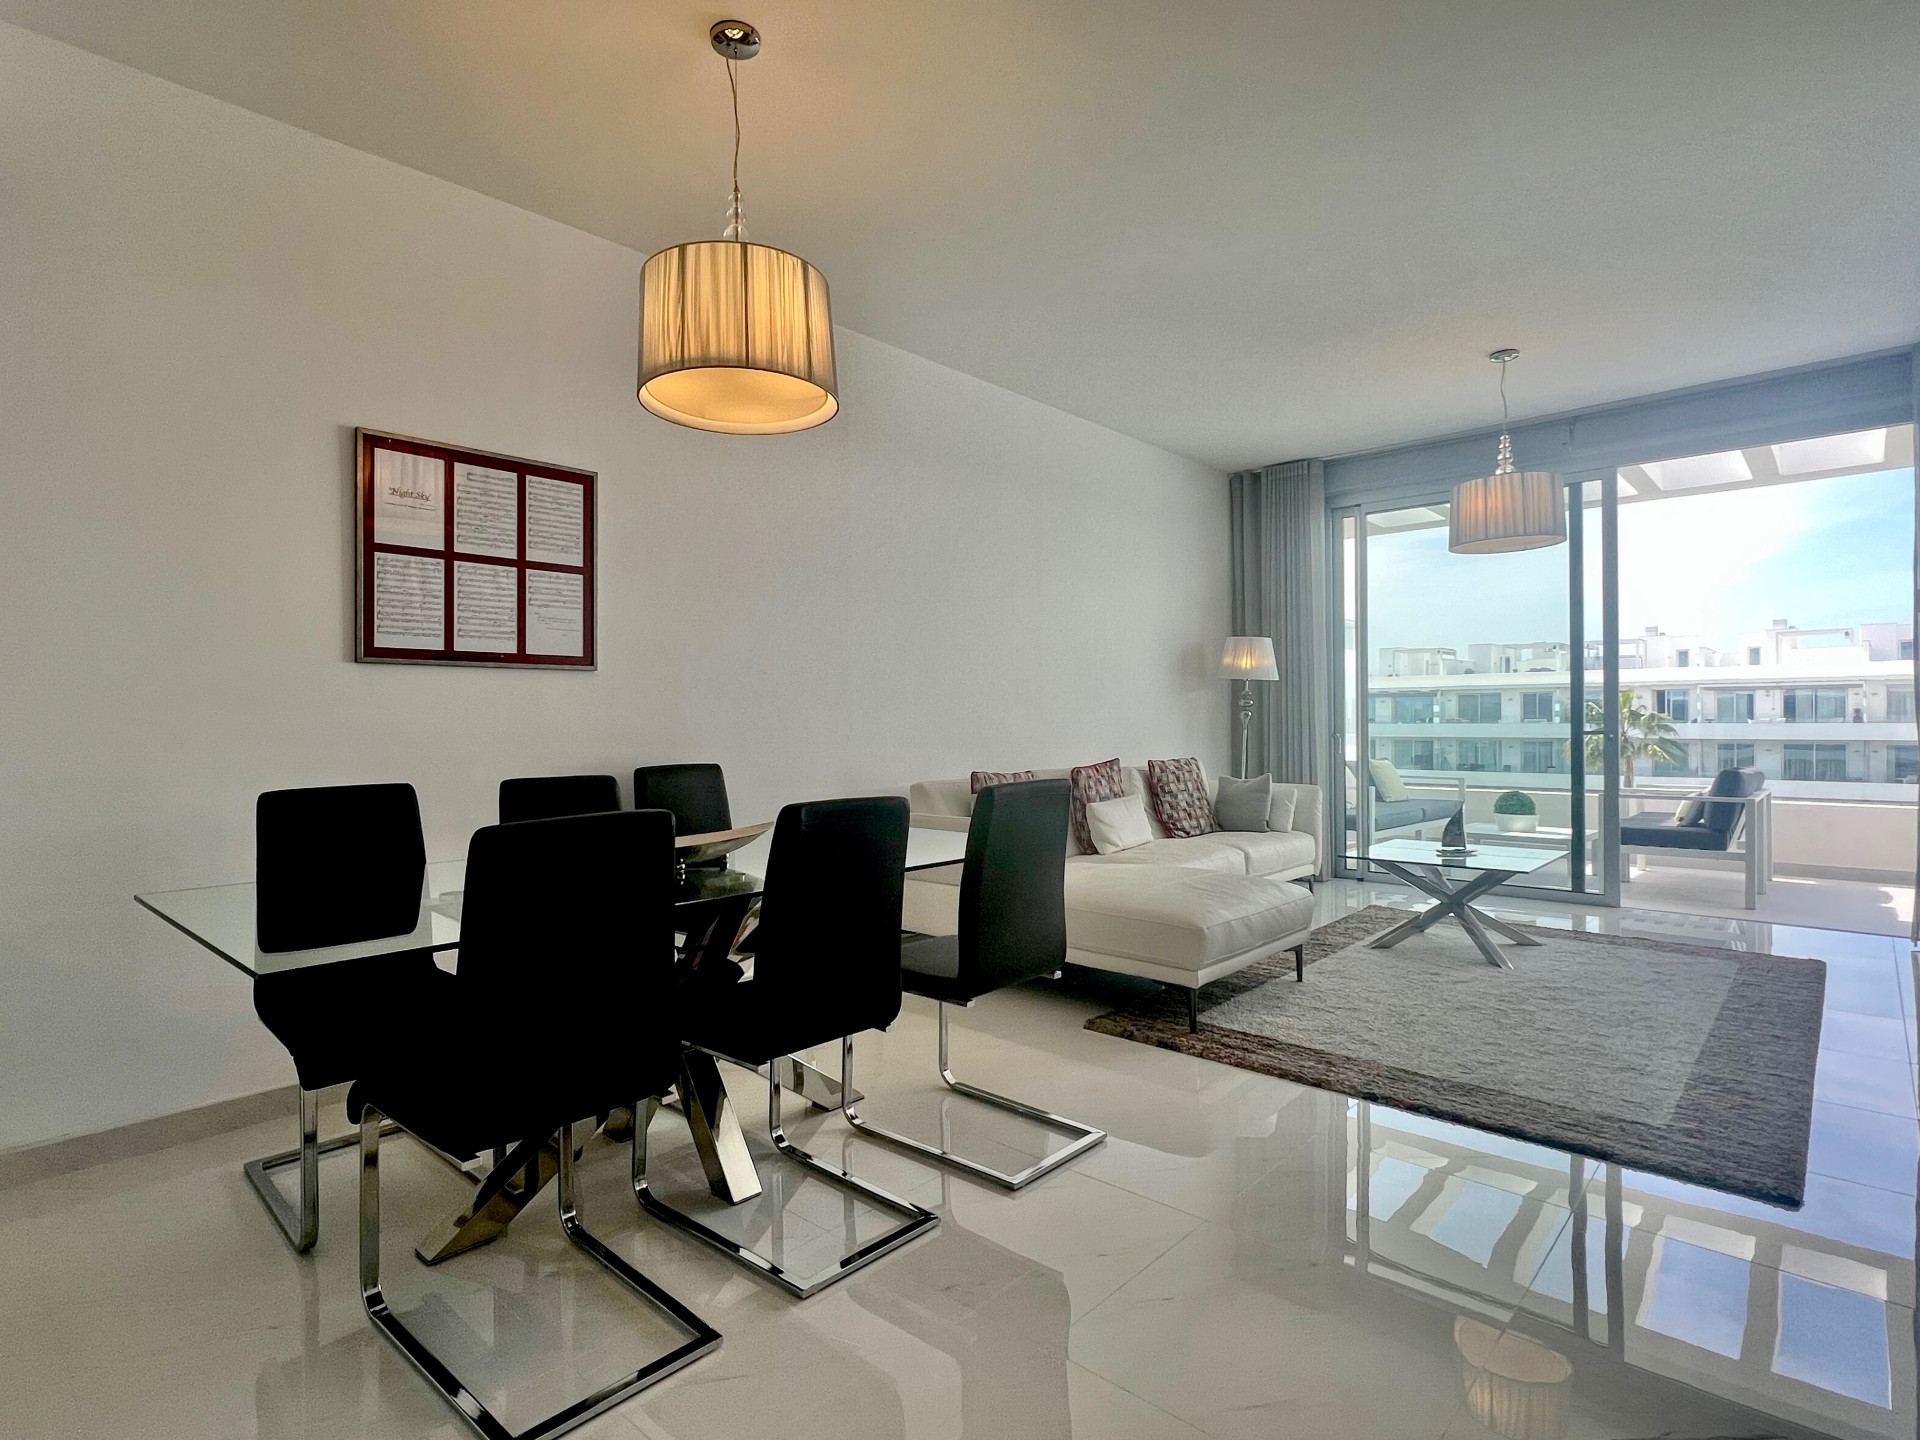 Large 4 bed, 3 bath penthouse with huge roof terrace in Bel Air